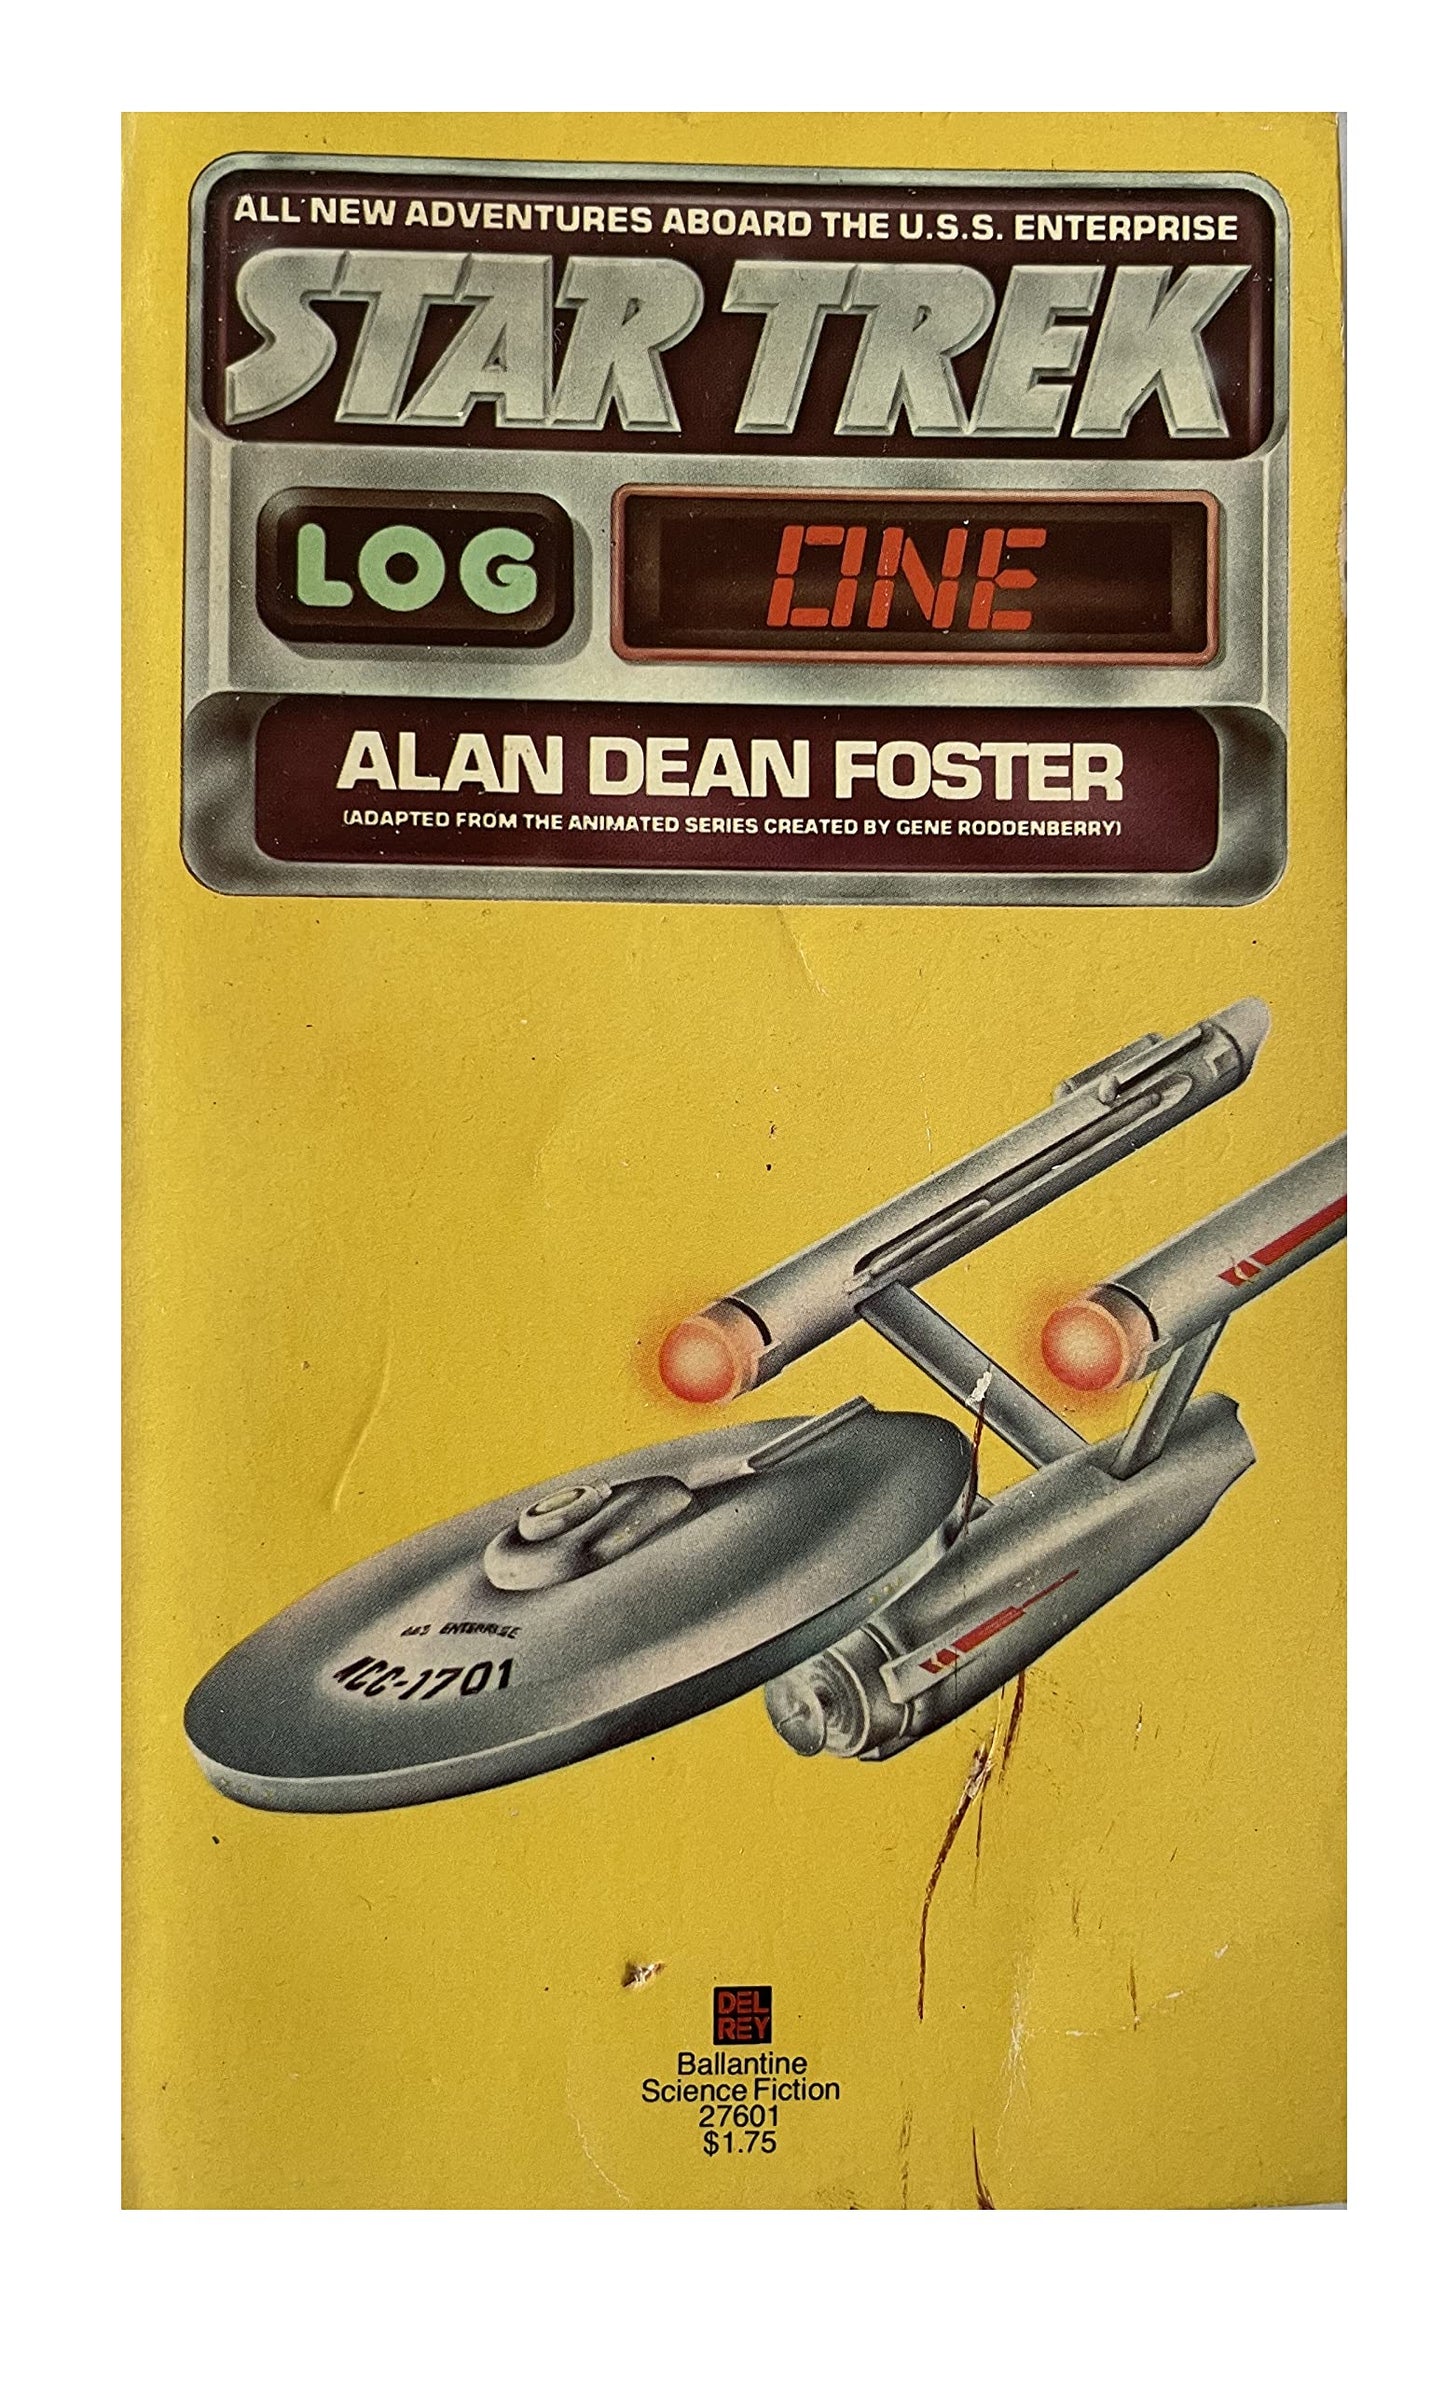 Vintage 1979 Star Trek Log One - Adapted From The Animated TV Series - Paperback Book - By Alan Dean Foster